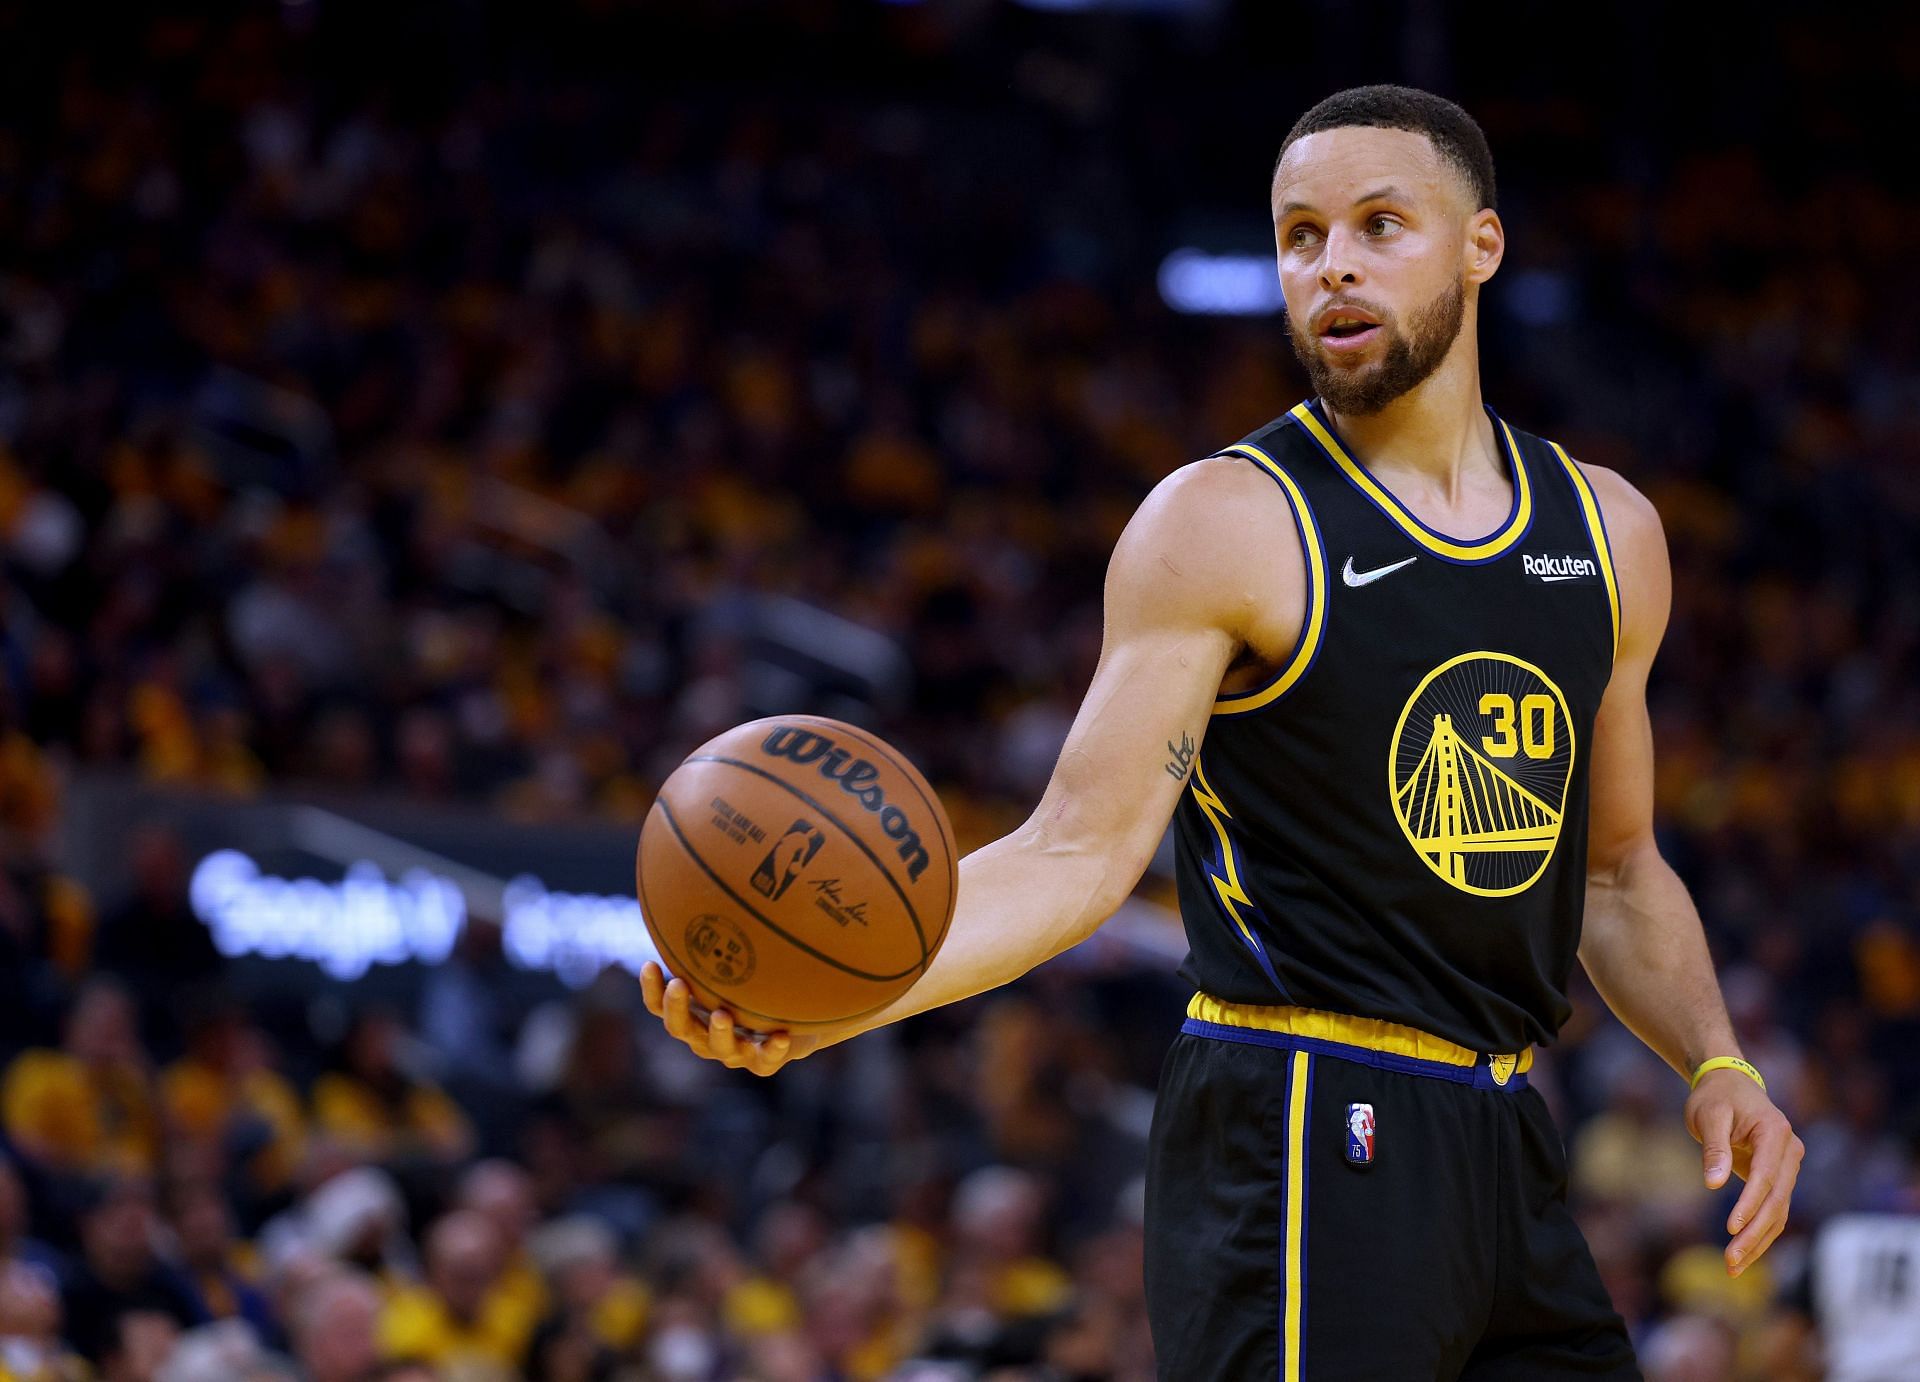 Steph Curry has become one of the top stars in the NBA, but Colin Cowherd believes he is underrated.